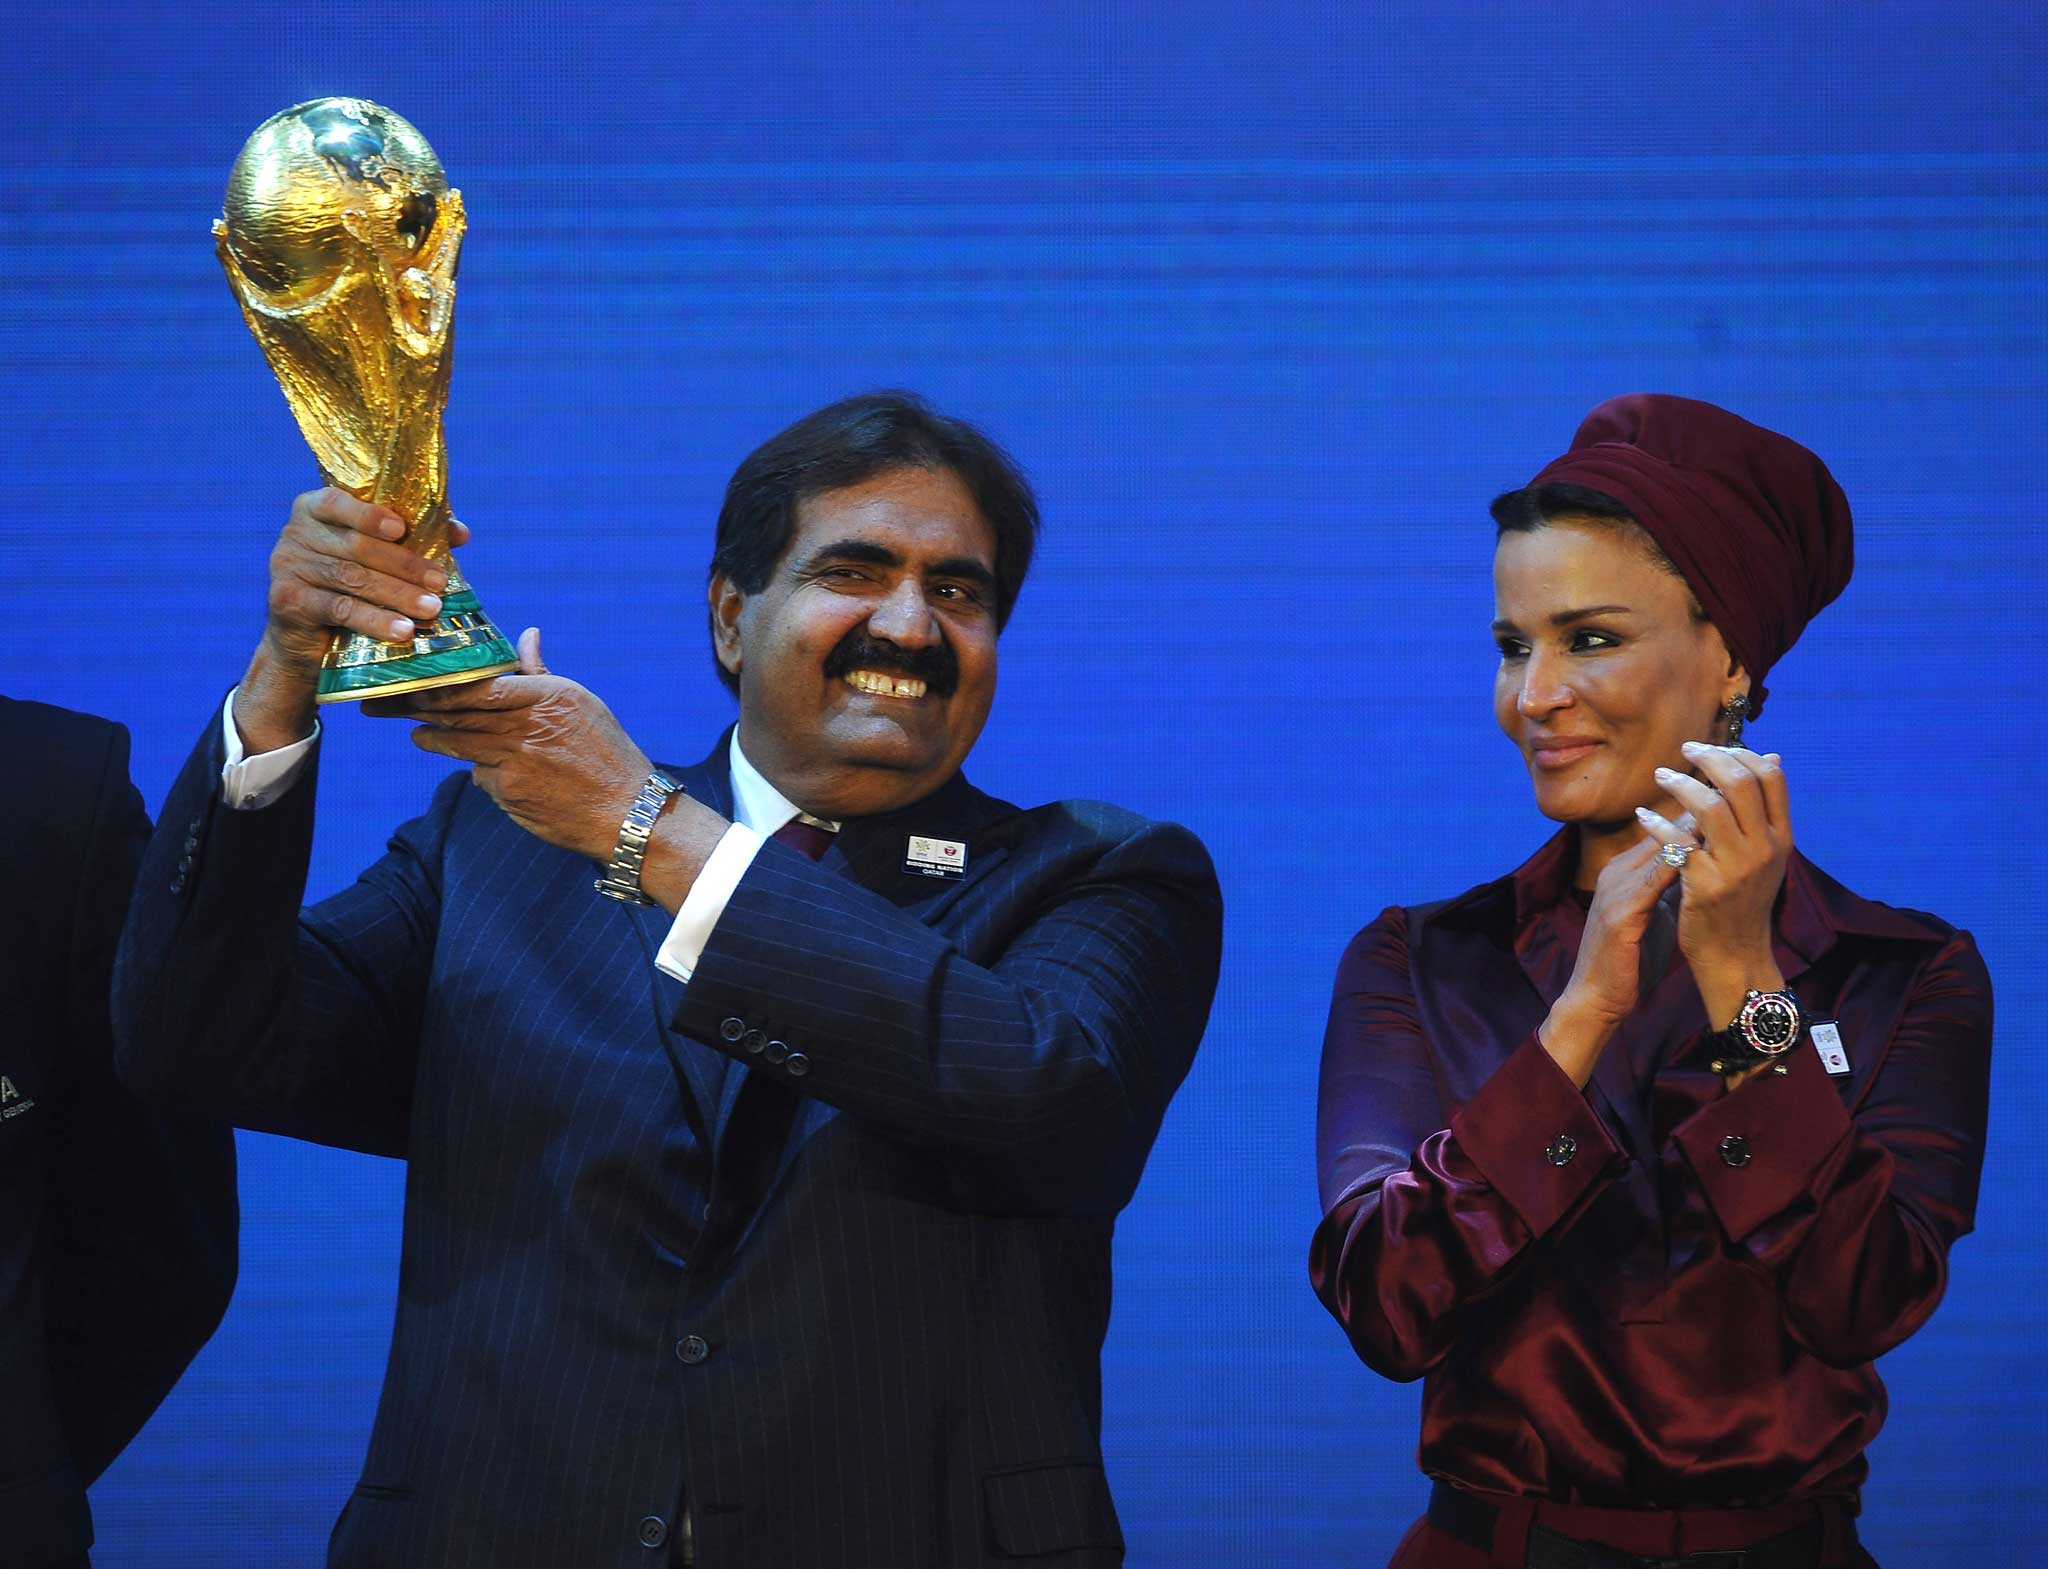 Qatar winning the bid for the 2022 World Cup in 2010